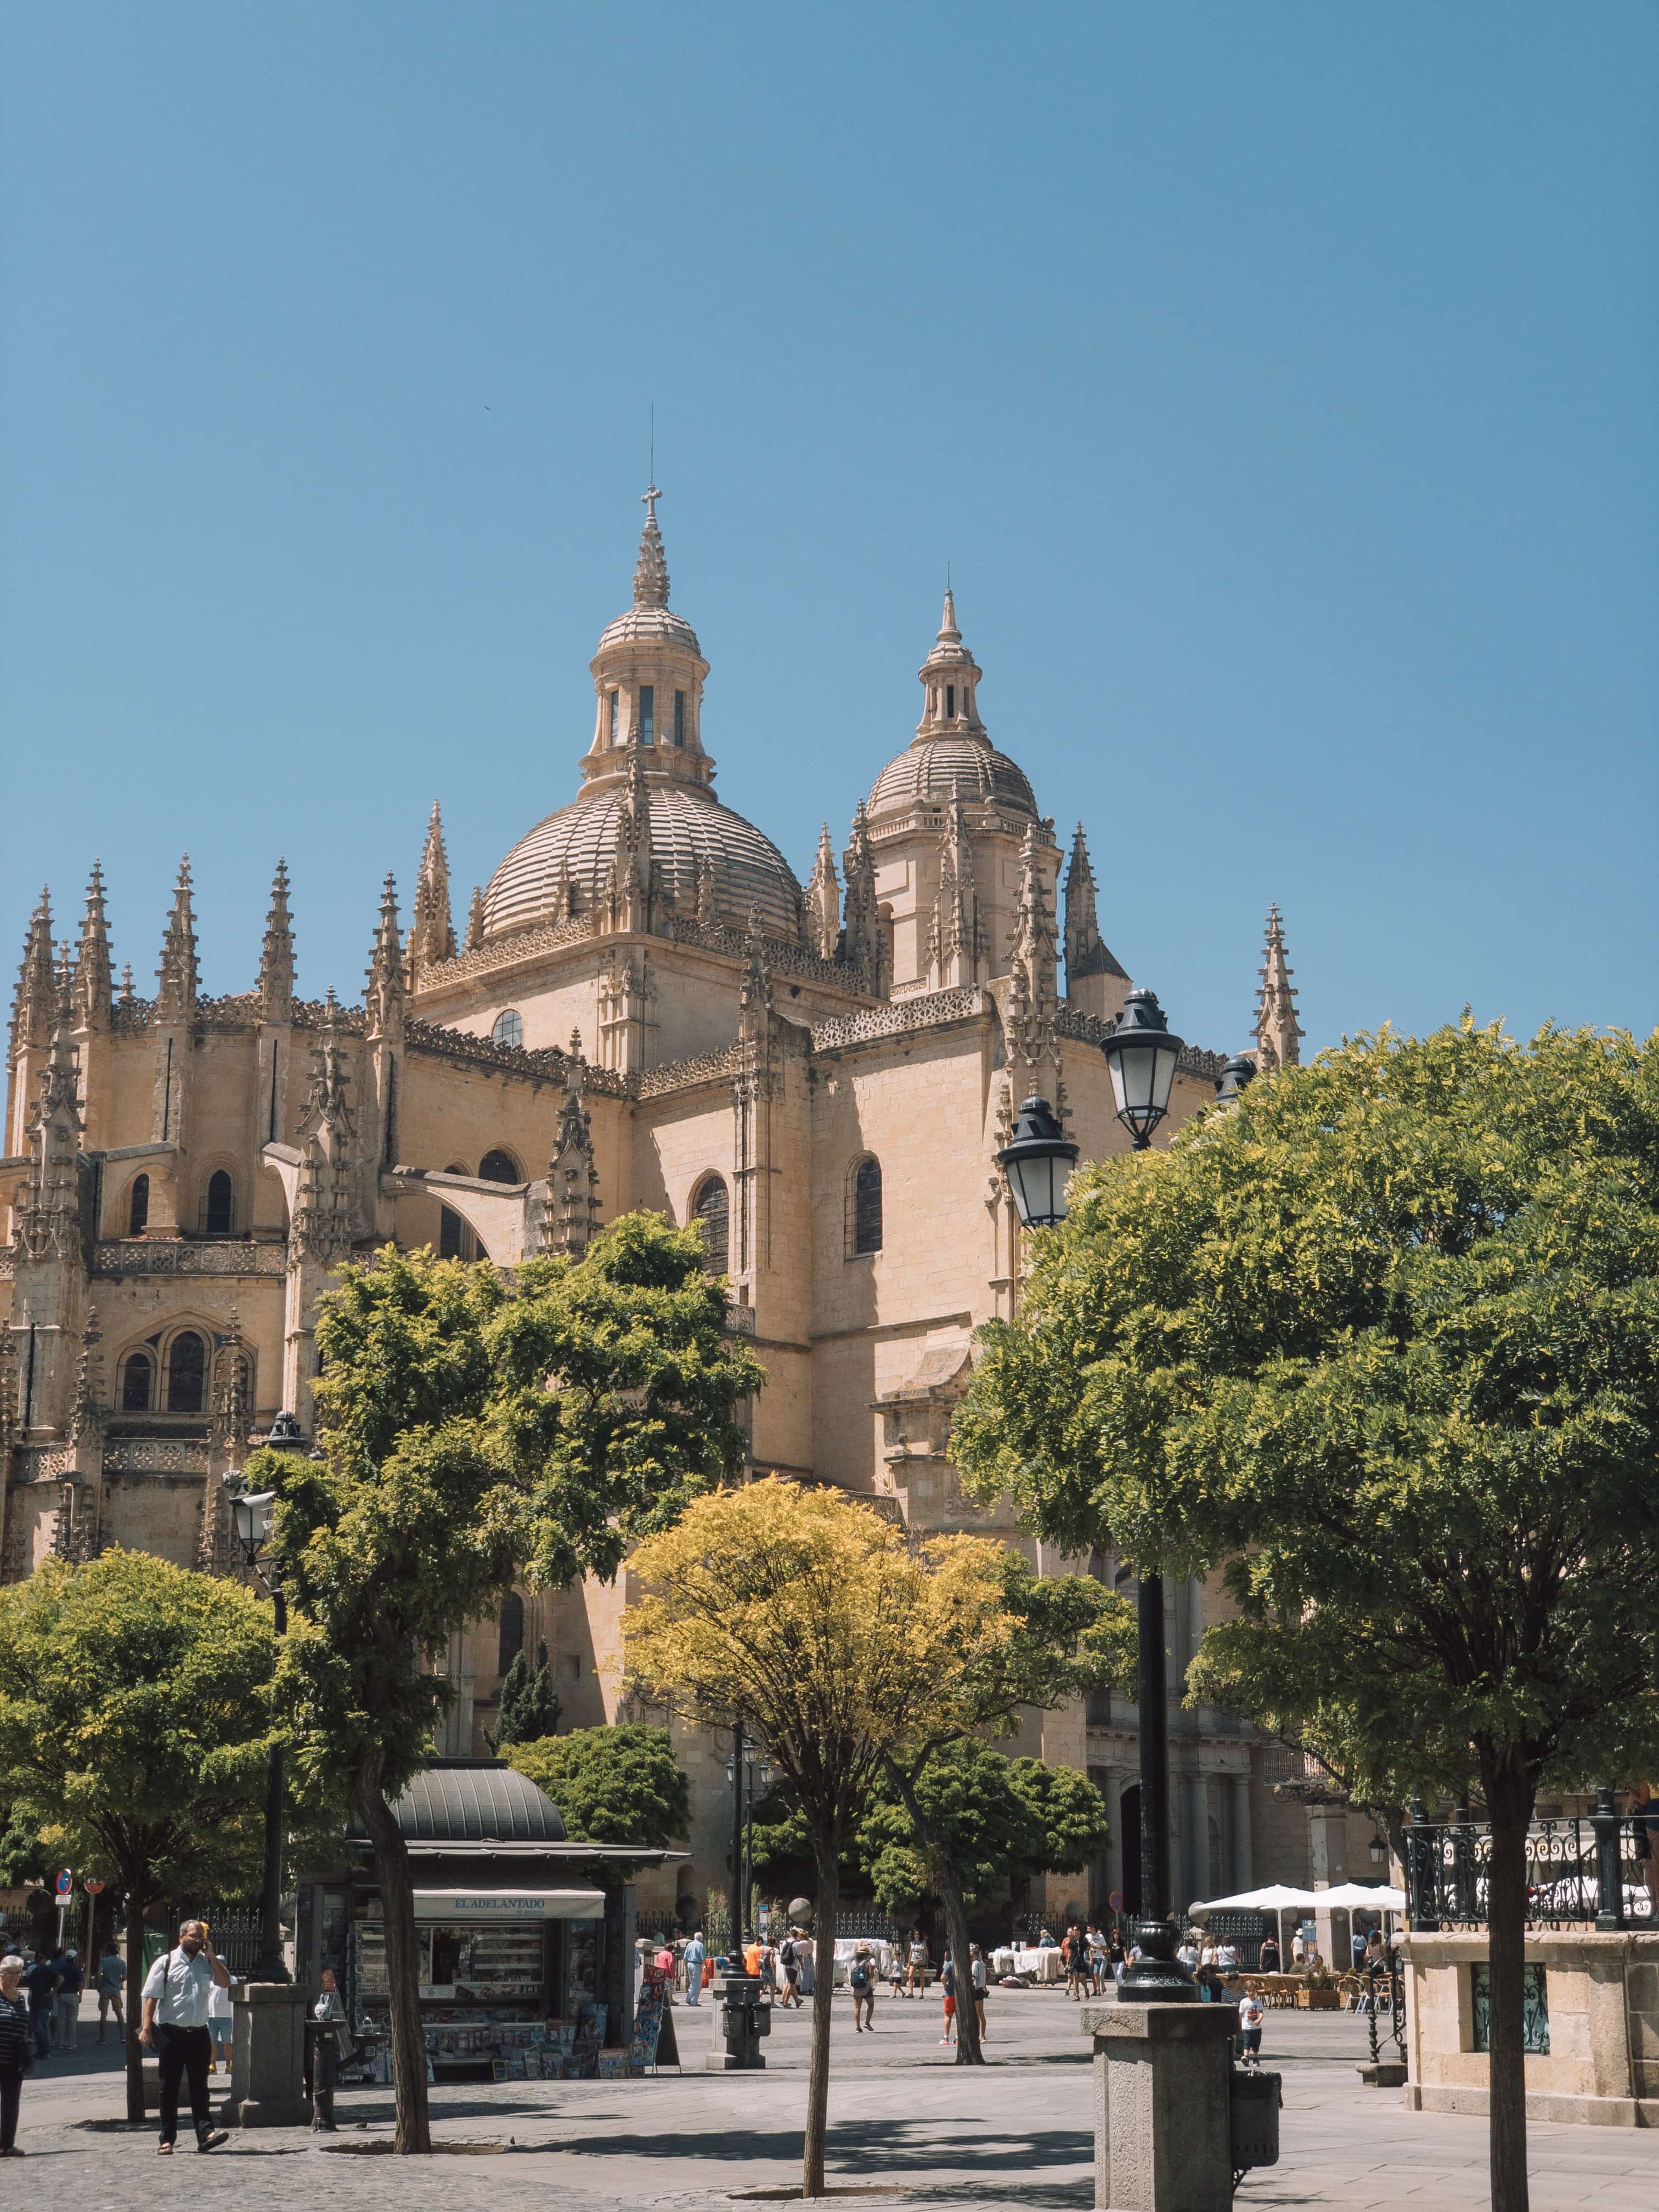 How To Get From Madrid Airport To Segovia - All Possible Ways, Travel Guide to Segovia: Things to do in Segovia, best time to visit Segovia, day tour from Madrid to Segovia, food to try in Segovia, eat cochinillo in Segovia